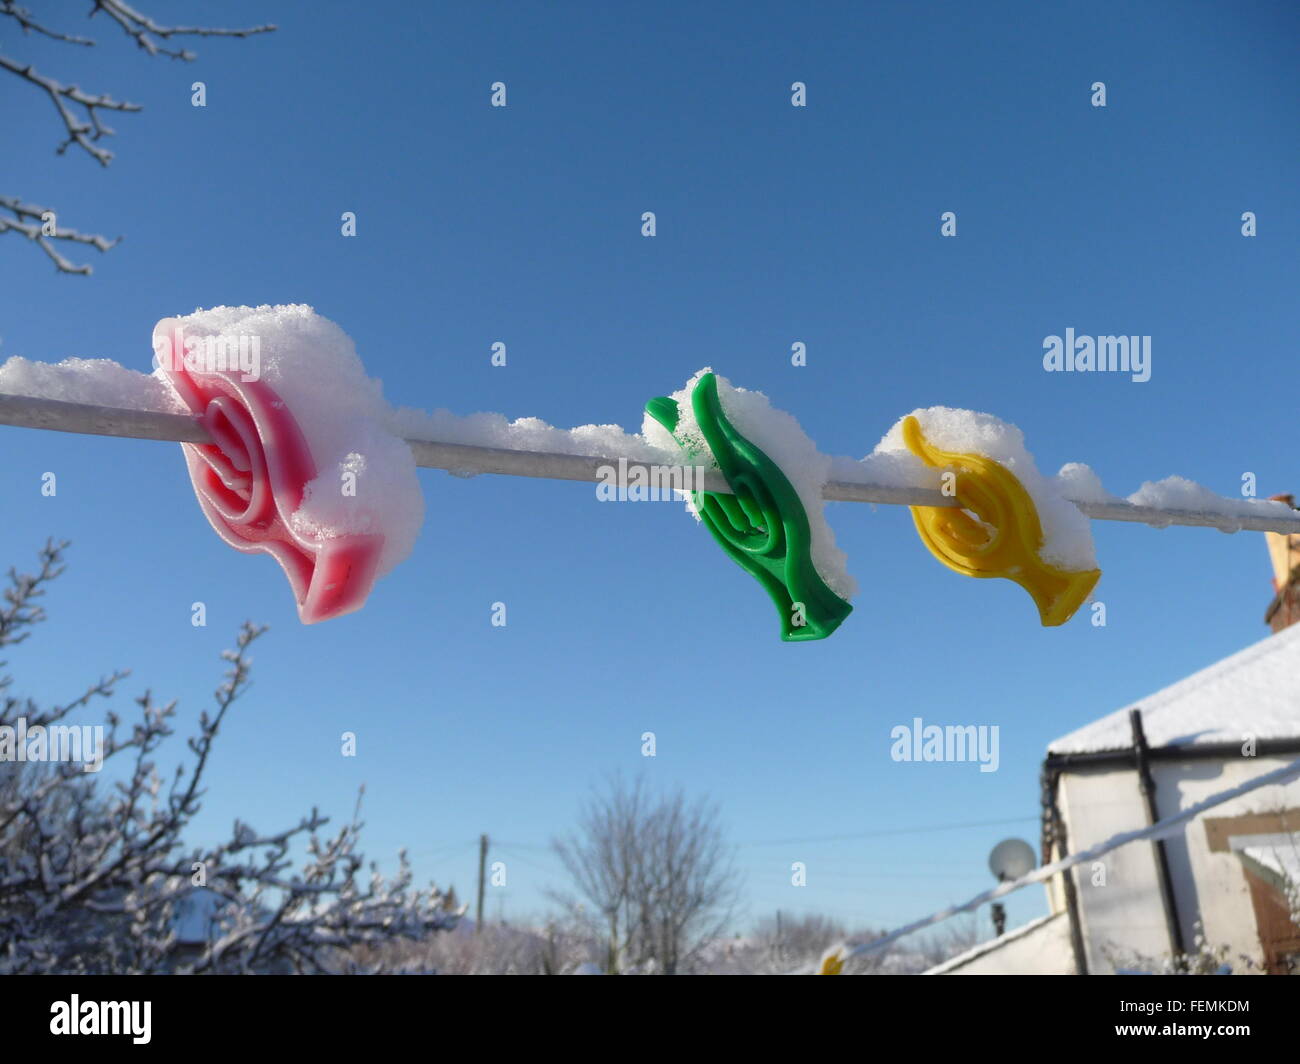 Shot of brightly colored plastic clothes pegs and line caked in snow, against a bright blue sky Stock Photo